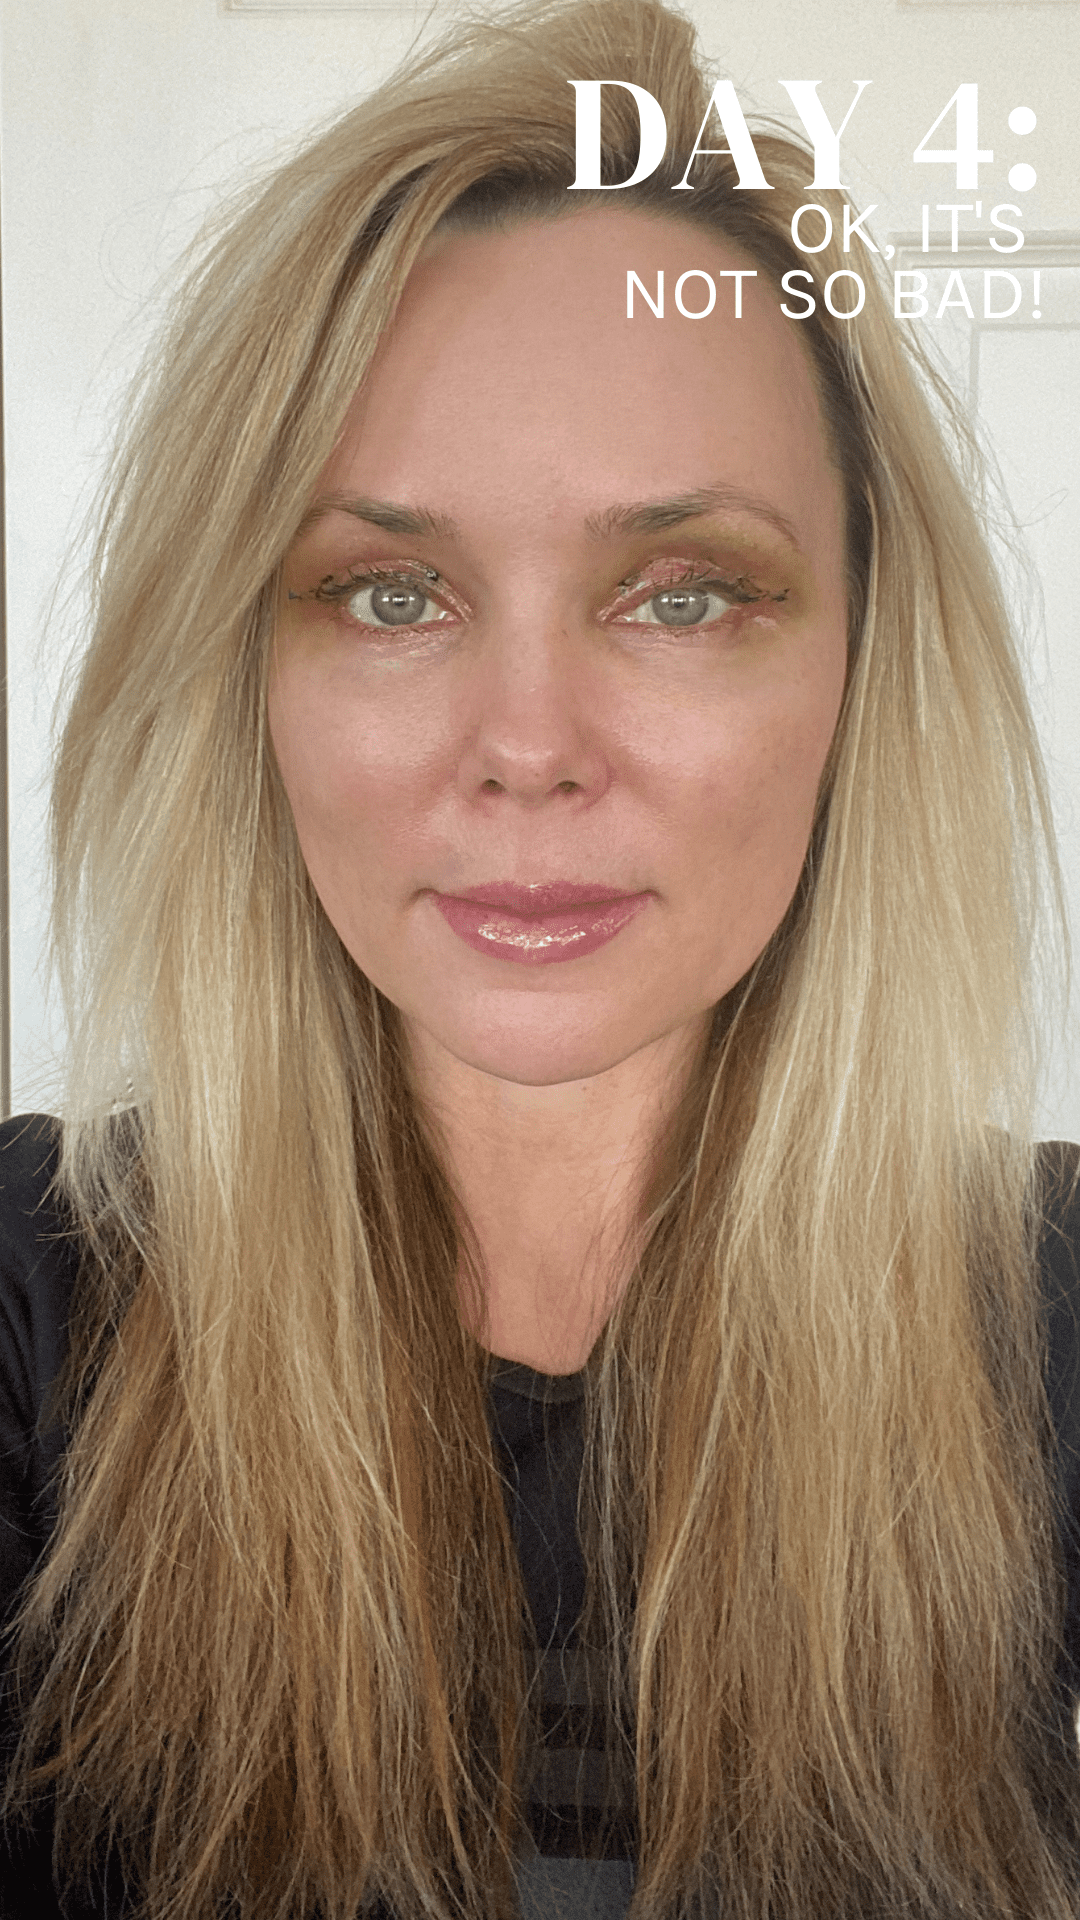 Patient Diary – What's it like to have an upper eyelids blepharoplasty? Day 4